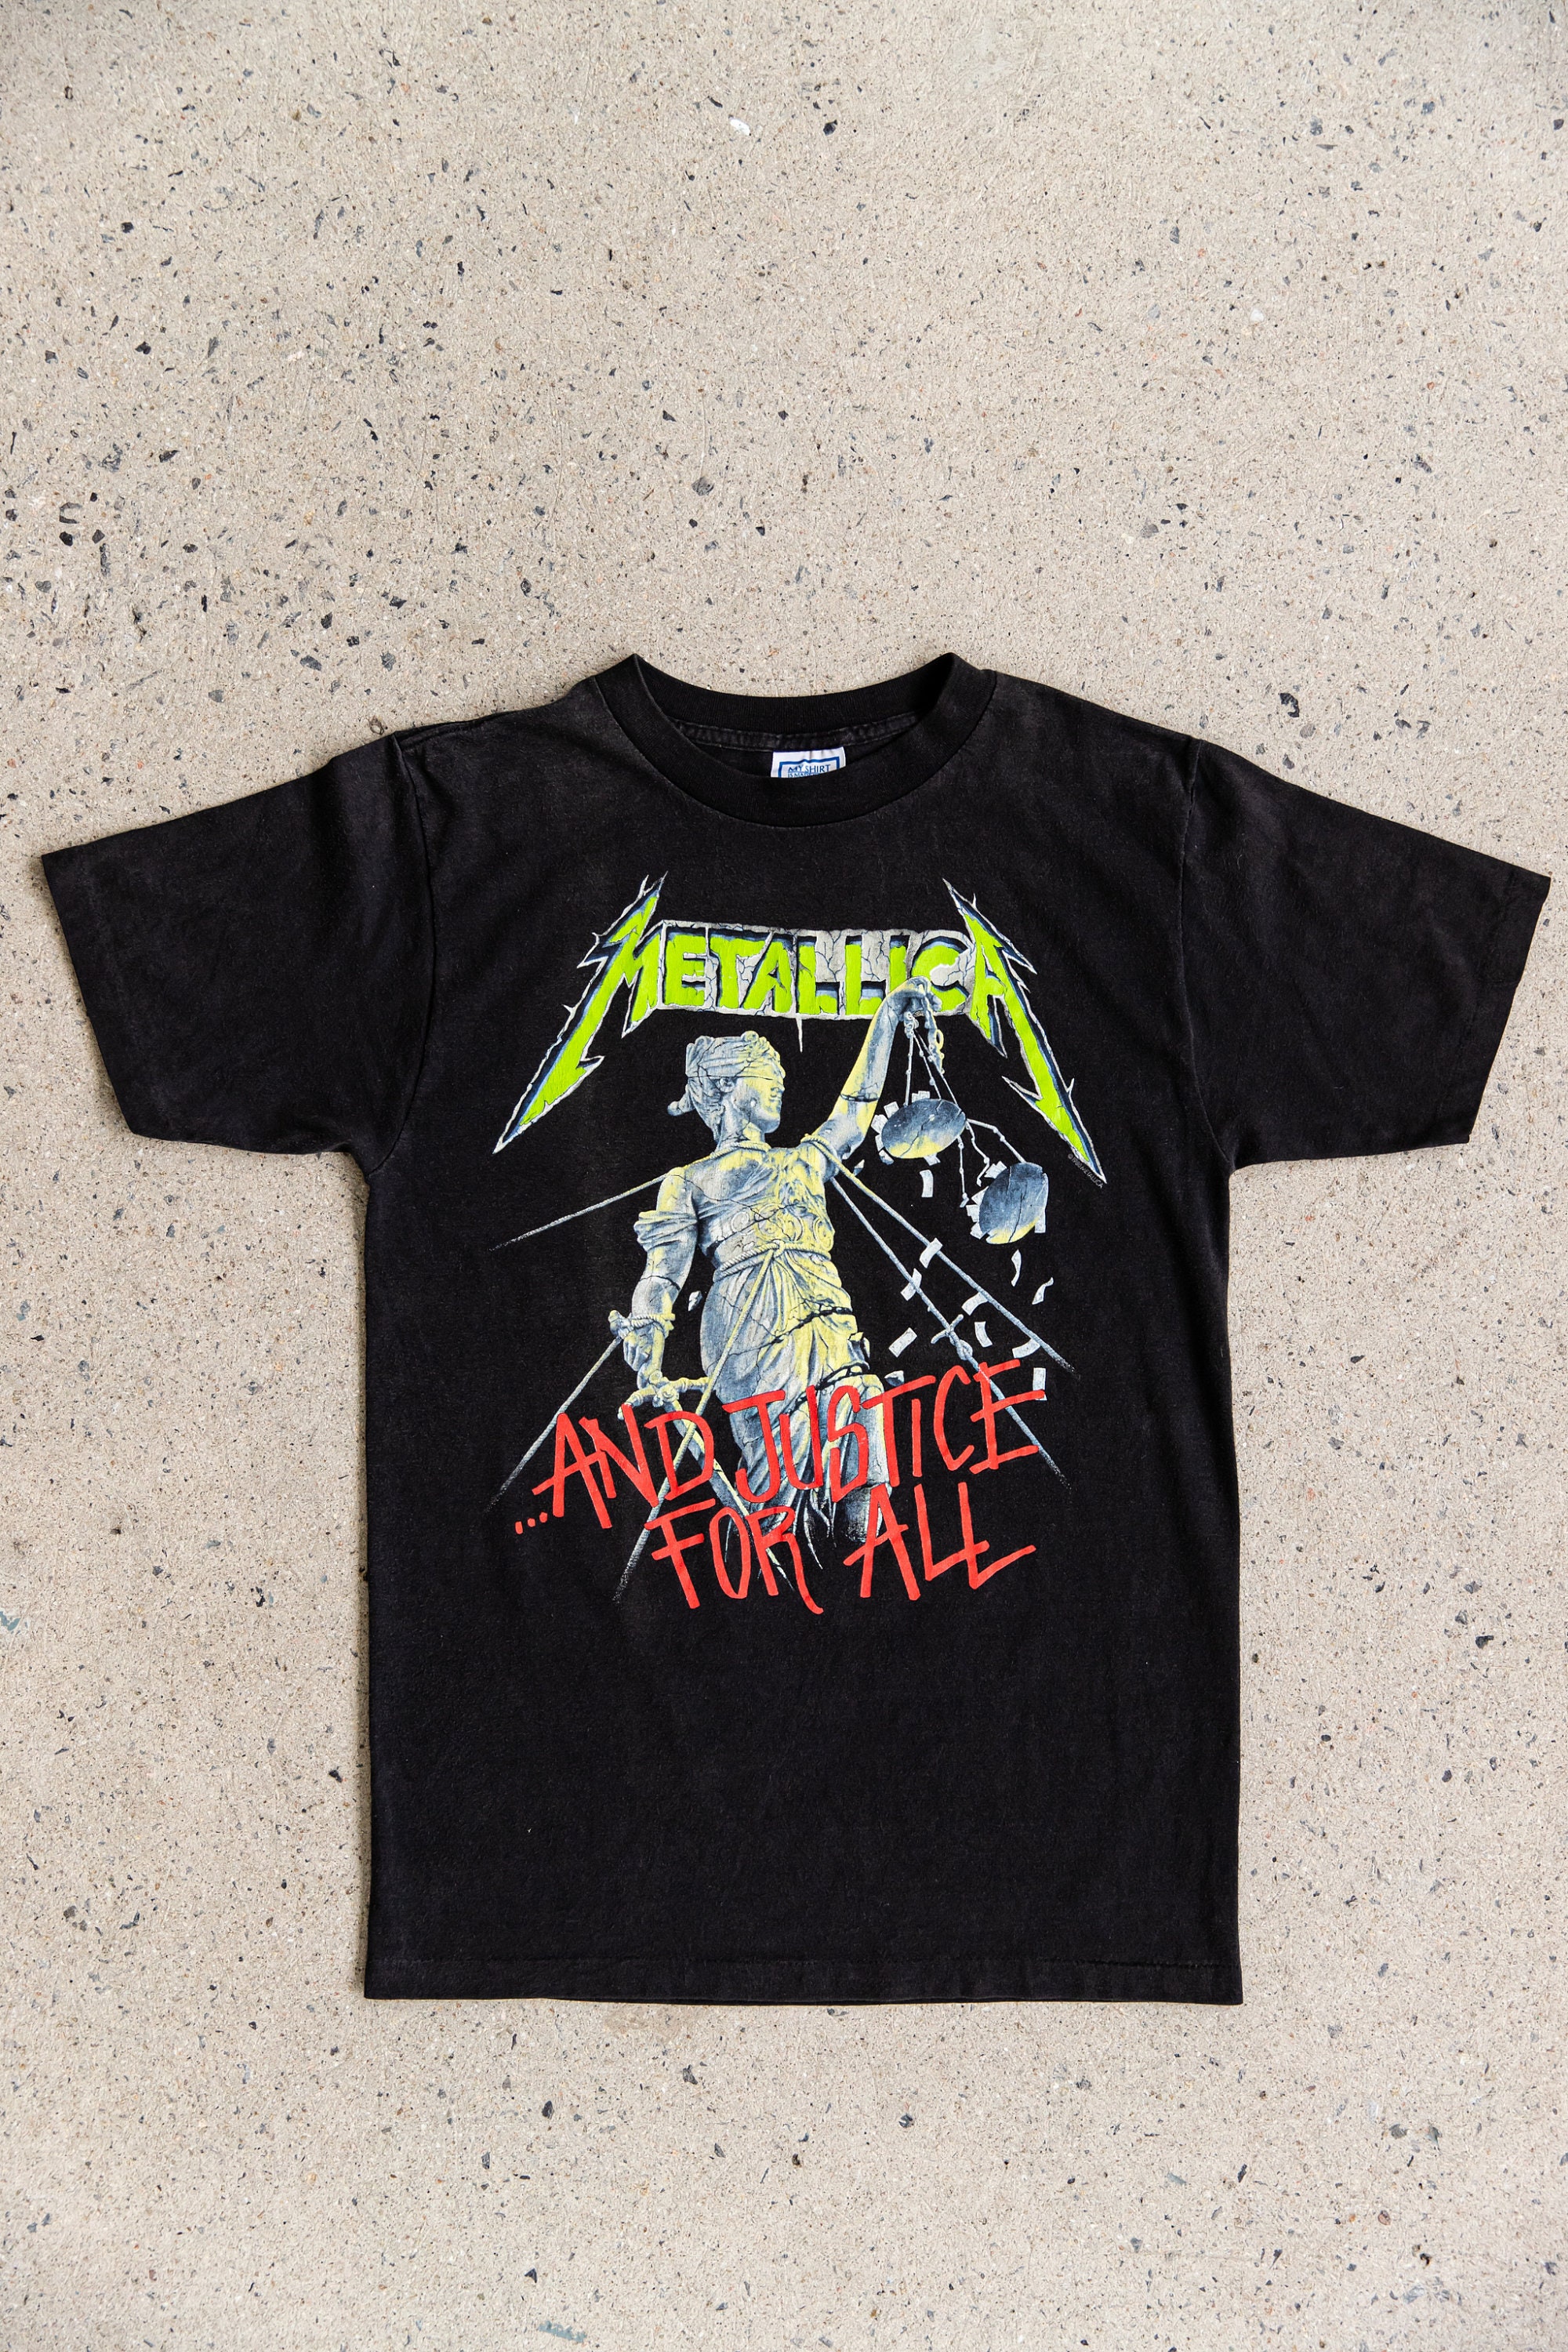 【80s】METALLICA AND JUSTICE FOR ALL T VTG